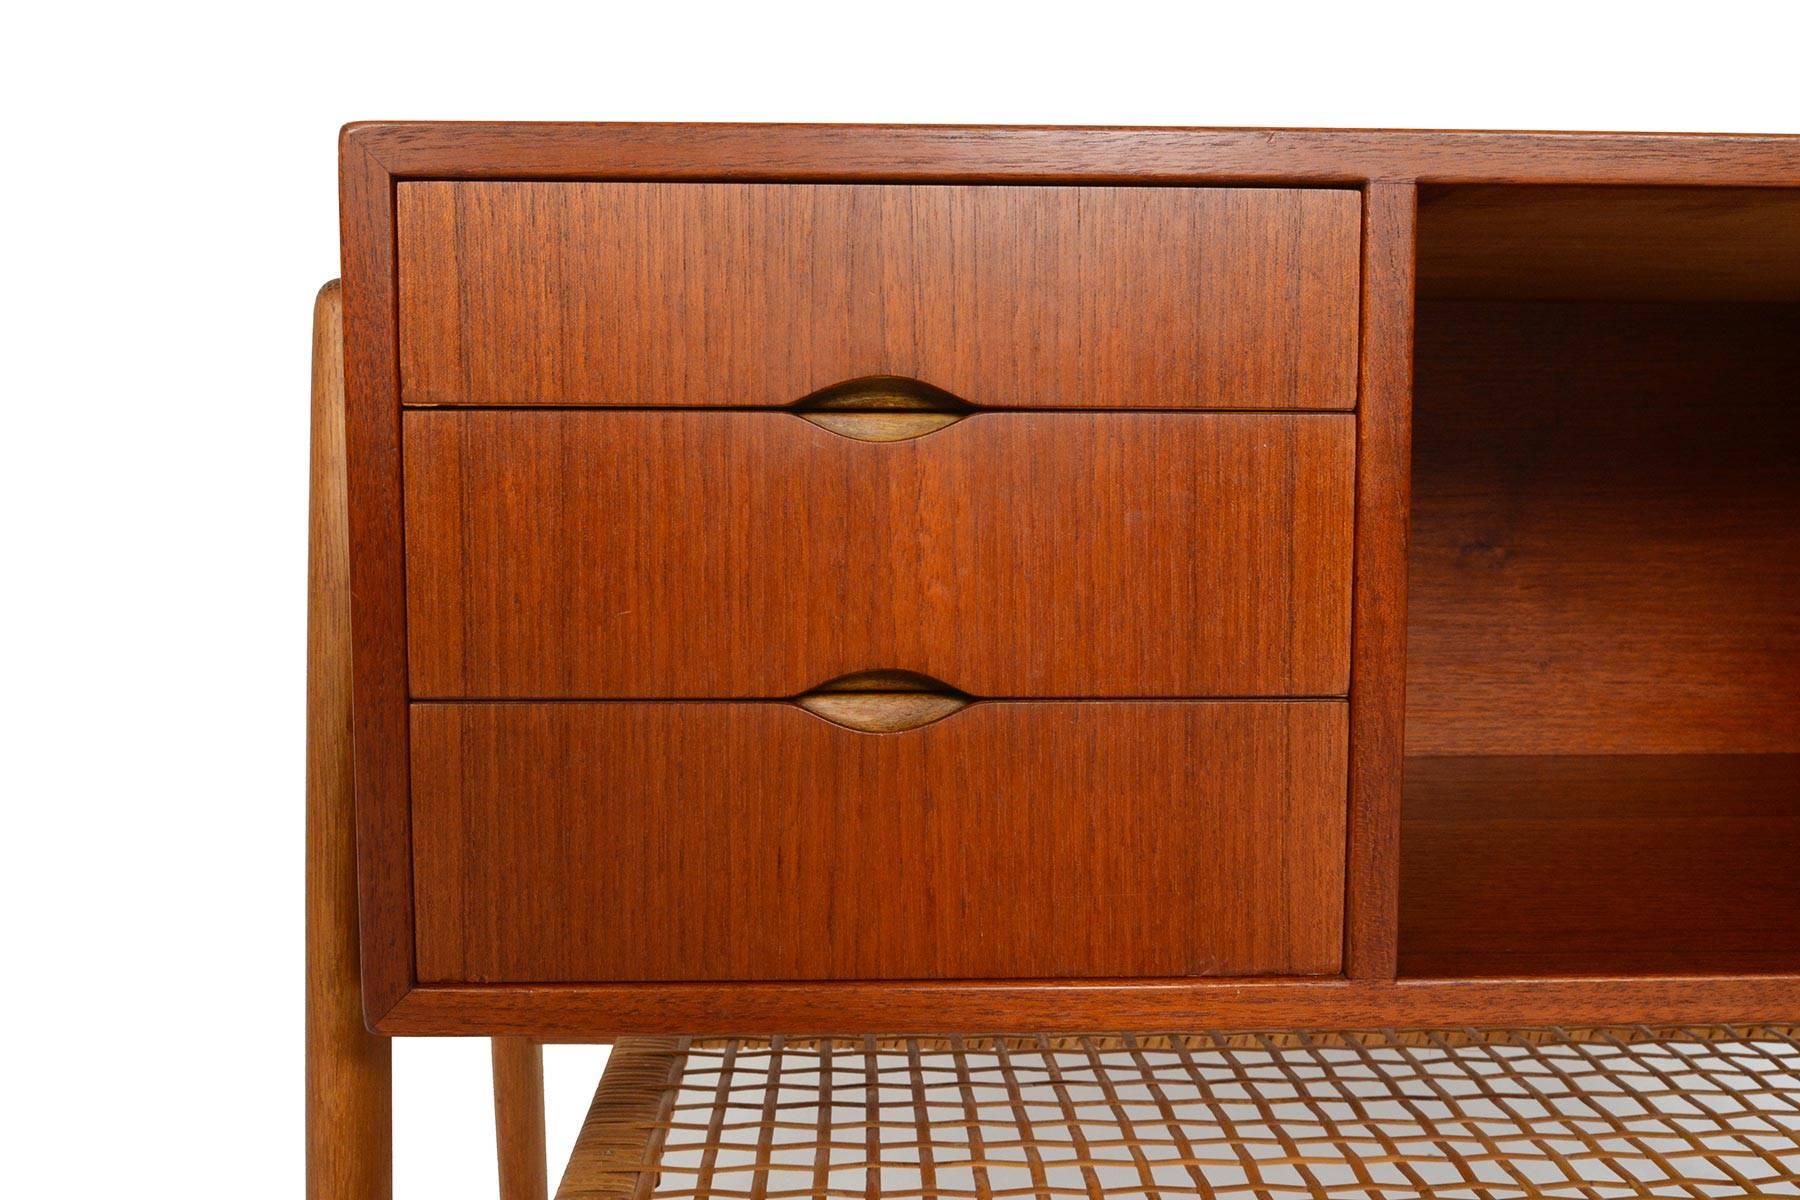 This Danish modern midcentury atomic teak and oak entry chest with caned rack is a perfect specimen of Scandinavian design. The expertly built teak case is flanked by sculpted quarter-sawn oak legs. Three drawers sit to the left of the case and